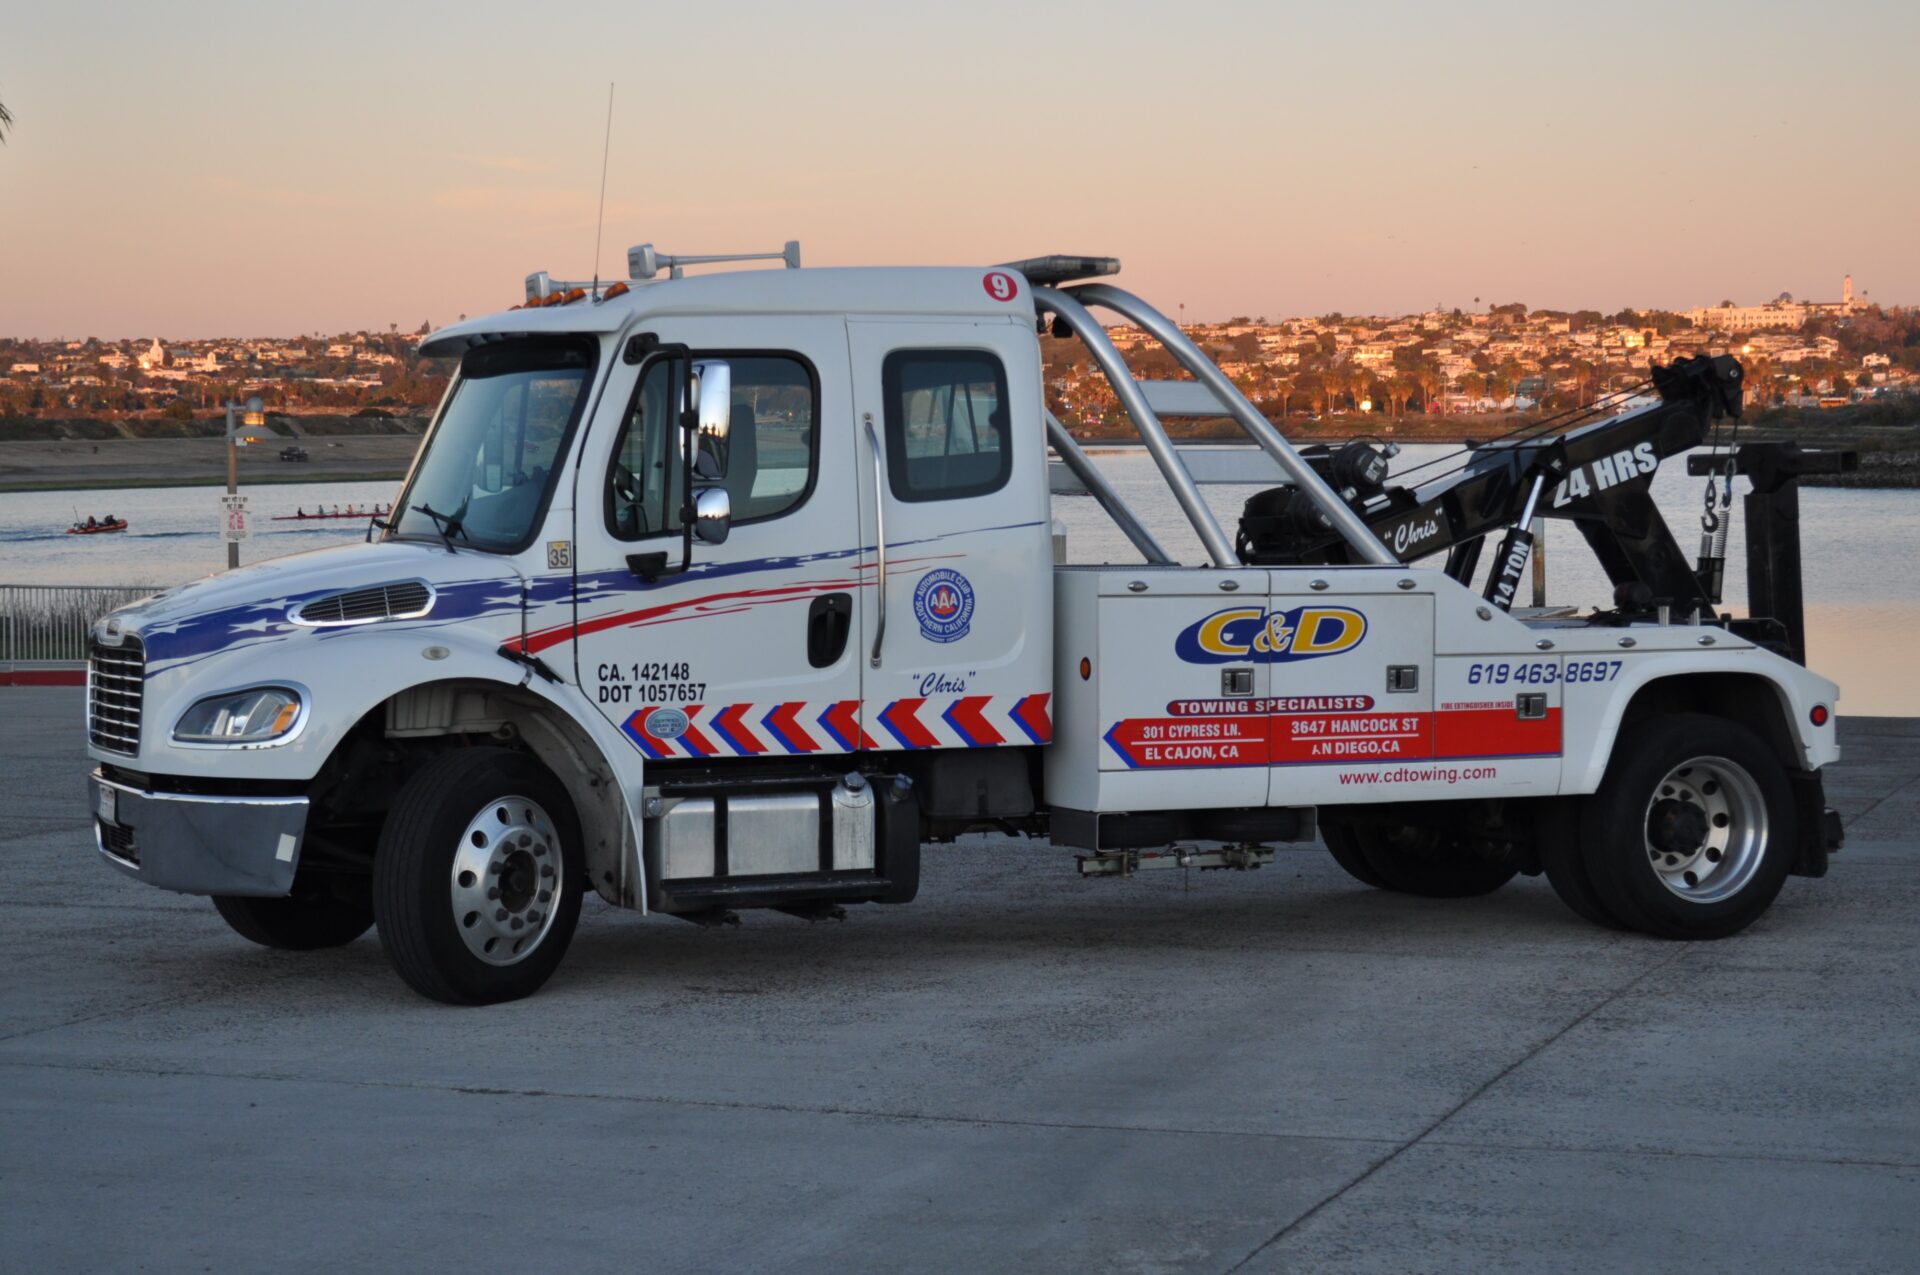 C & D Towing San Diego (619)463-3945